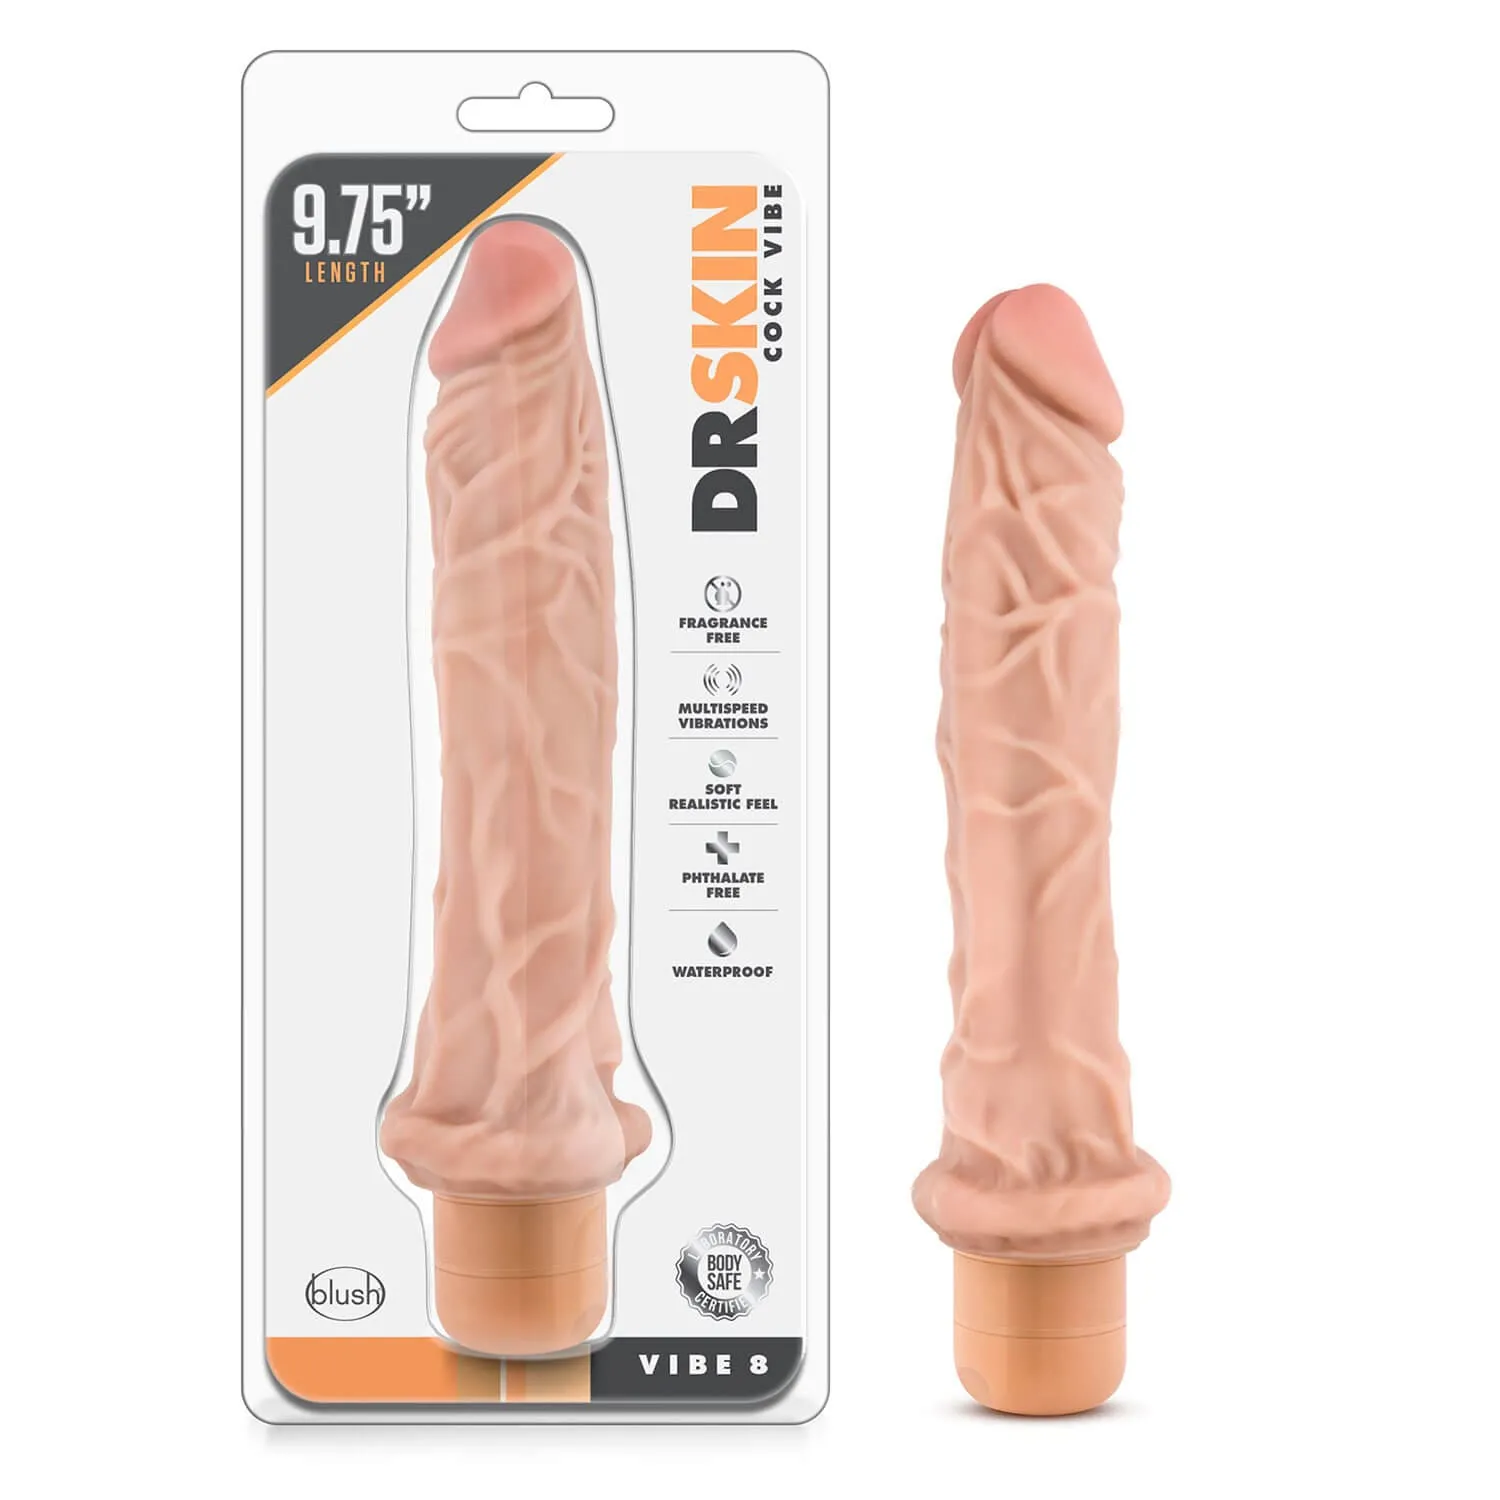 BL-11333 DR. SKIN - COCK VIBE 8 - 9.75 INCH VIBRATING COCK -BEIGE